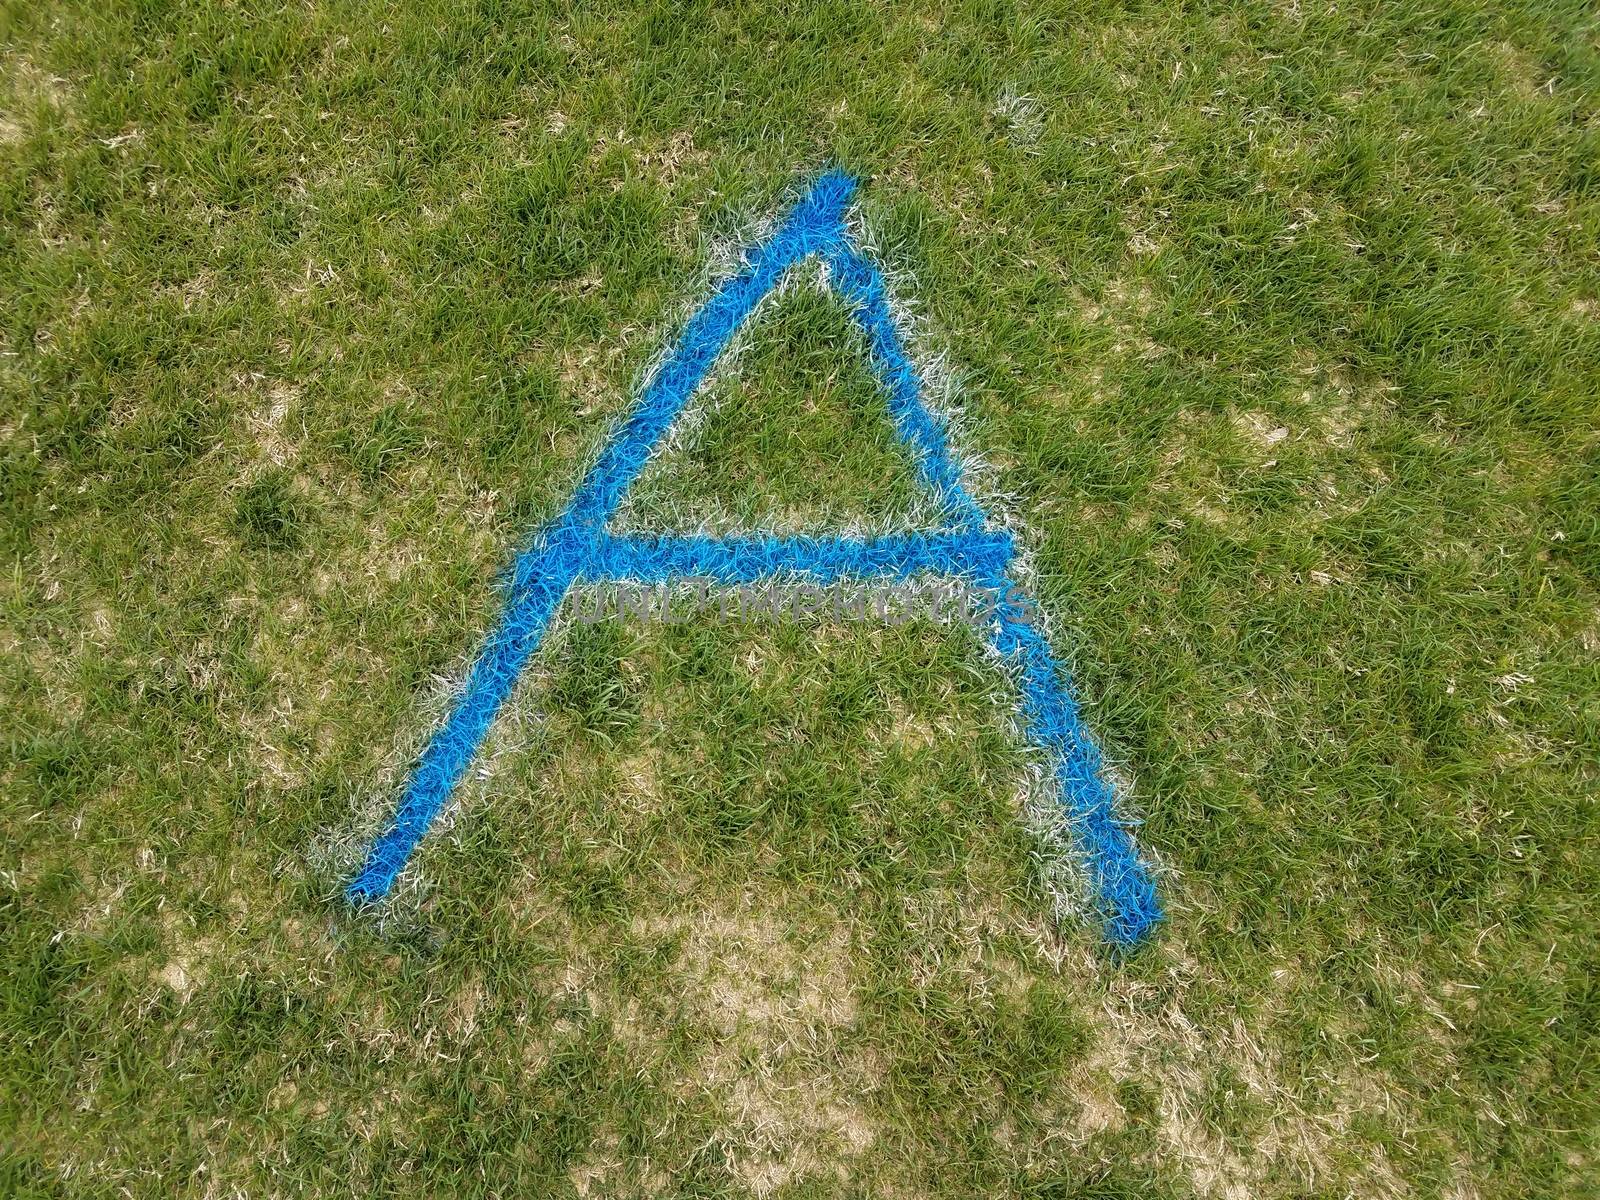 blue letter A spray painted on green grass by stockphotofan1